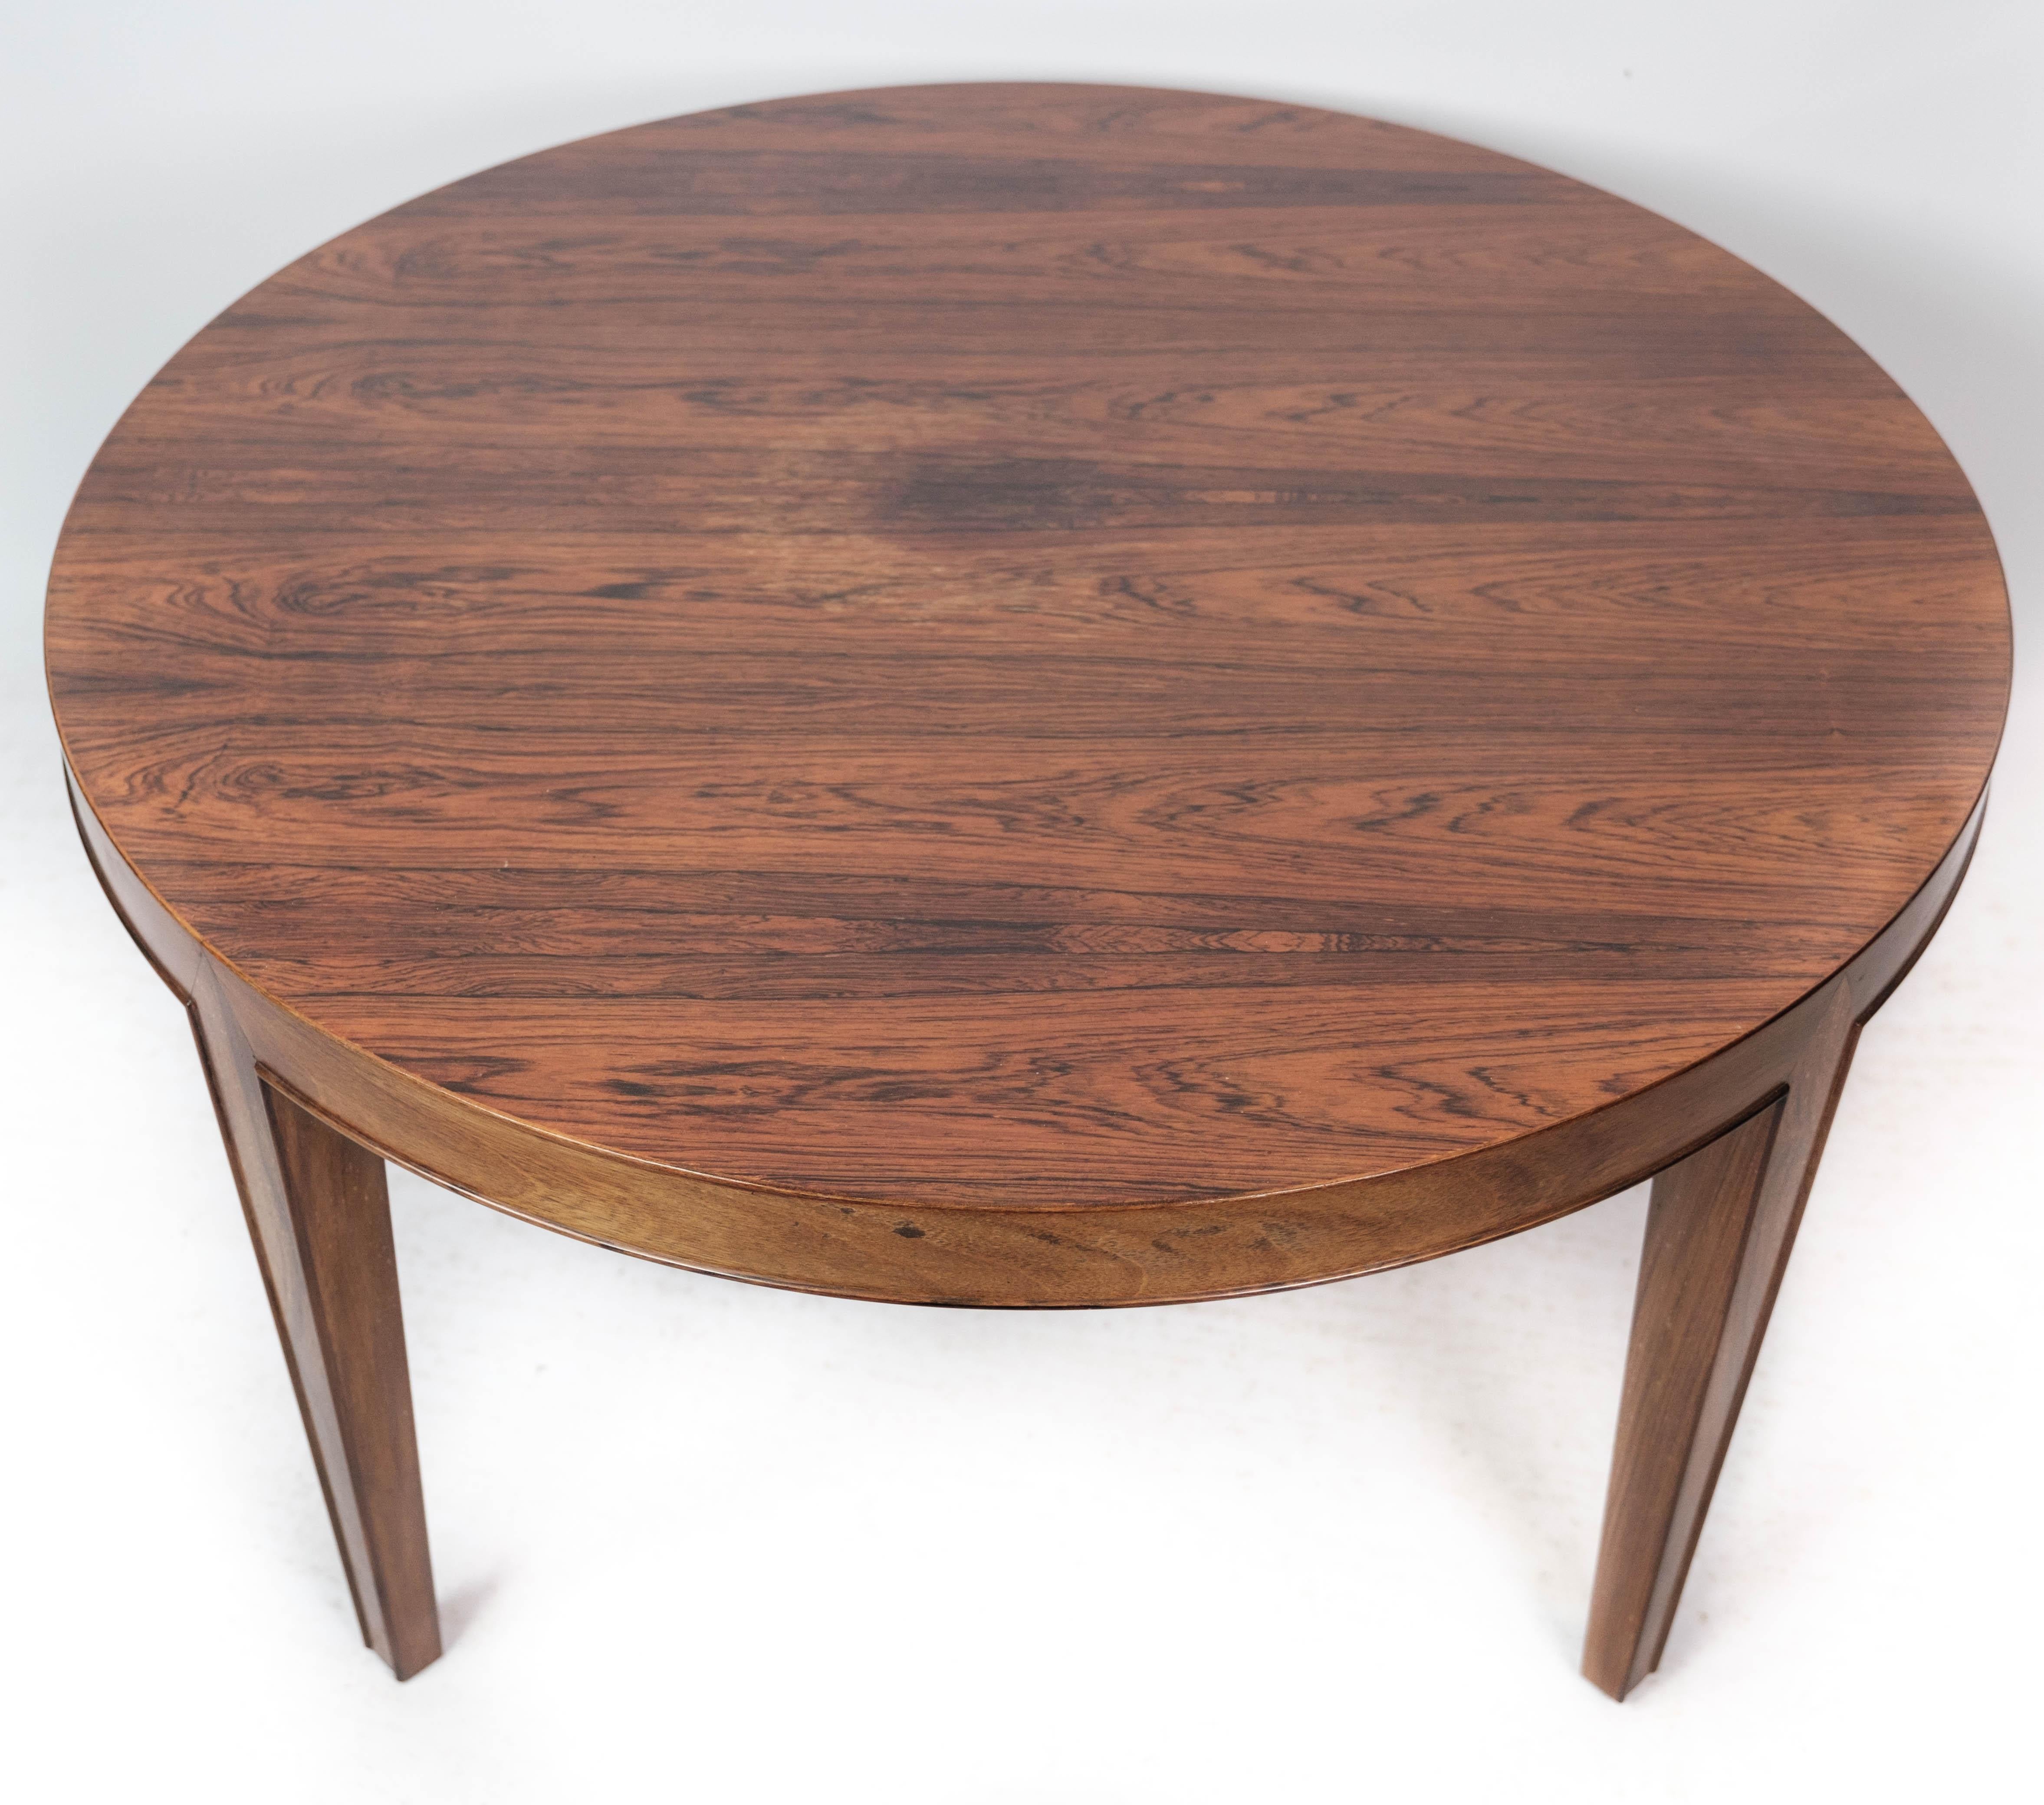 The coffee table crafted from rosewood and designed by Severin Hansen, manufactured by Haslev Furniture in the 1960s, is a stunning example of Danish modernist design.

Rosewood, revered for its rich hues and distinctive grain patterns, lends a